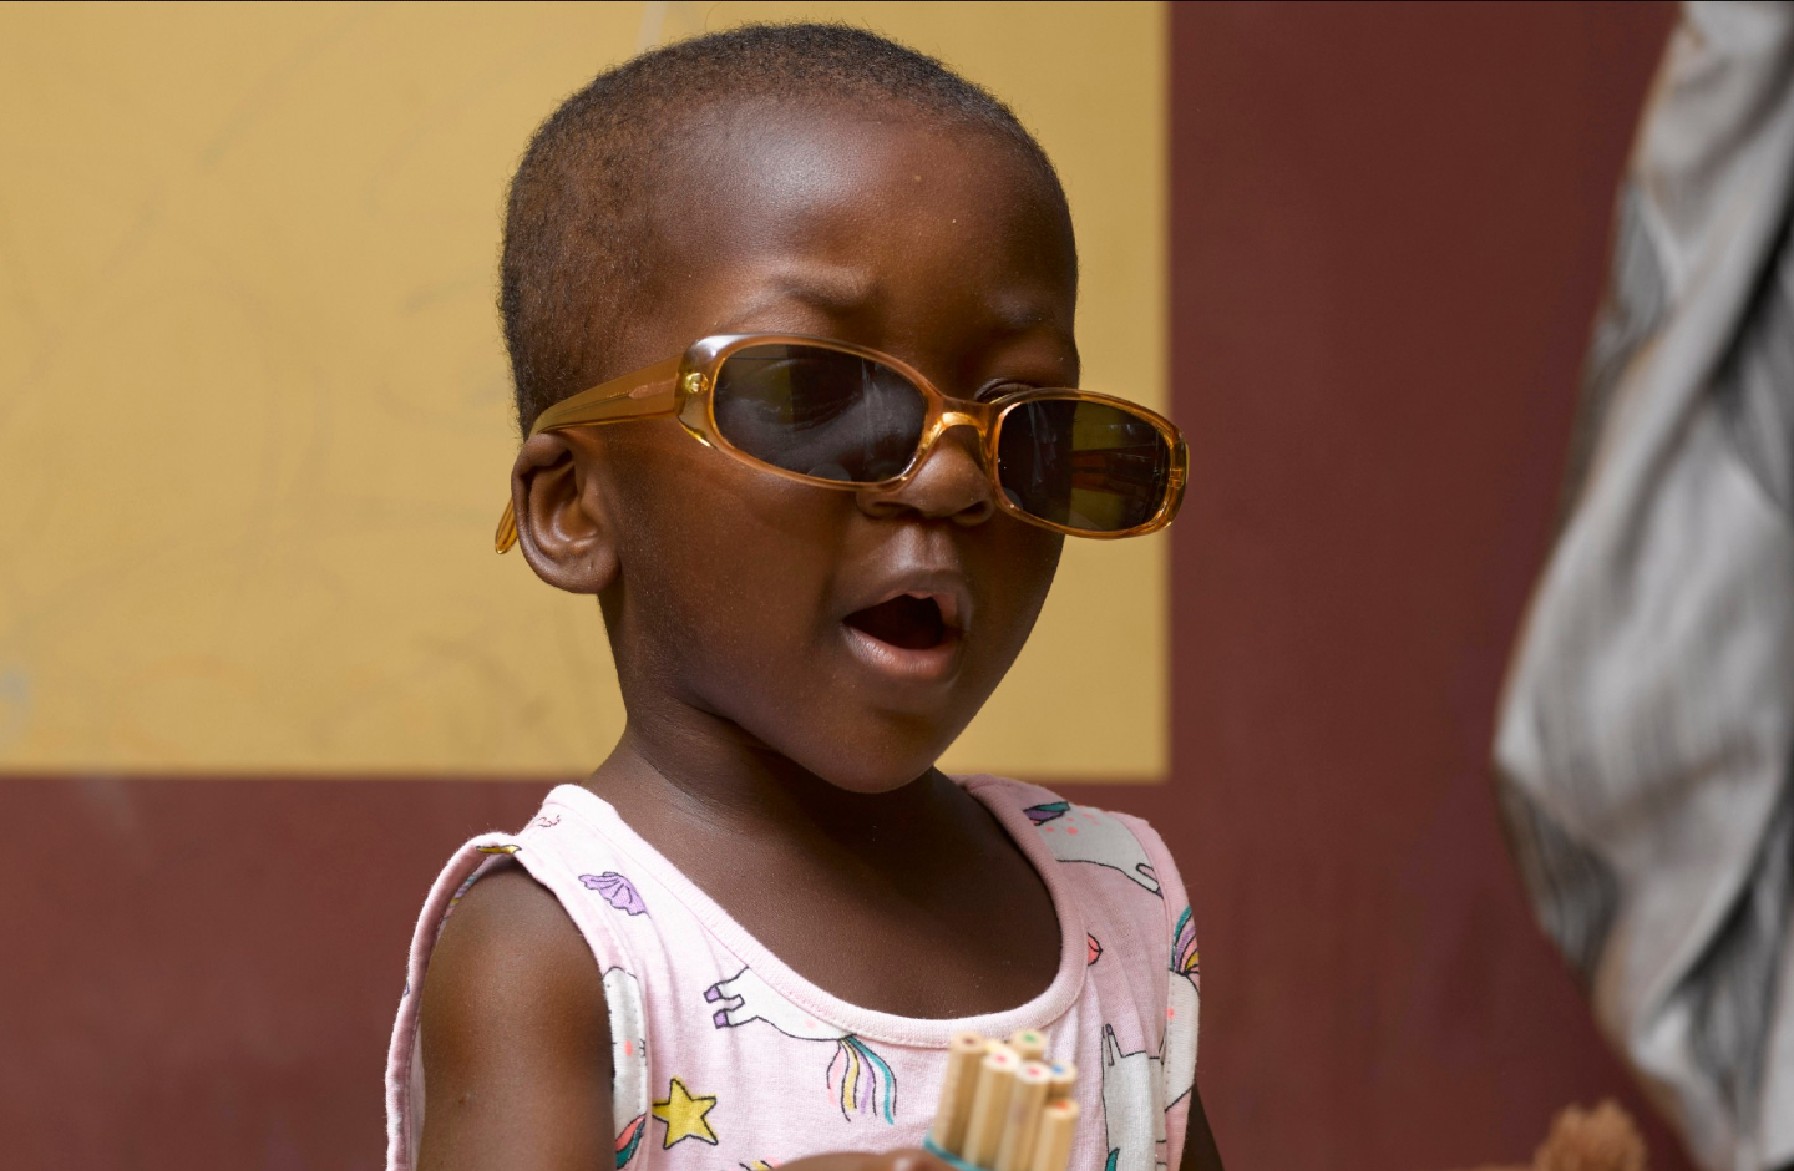 Hakeema’s strabismus made light exposure painful. After receiving surgery on the Flying Eye Hospital in Ghana, she's looking forward to attending school again. Photo: Geoff Oliver Bugbee